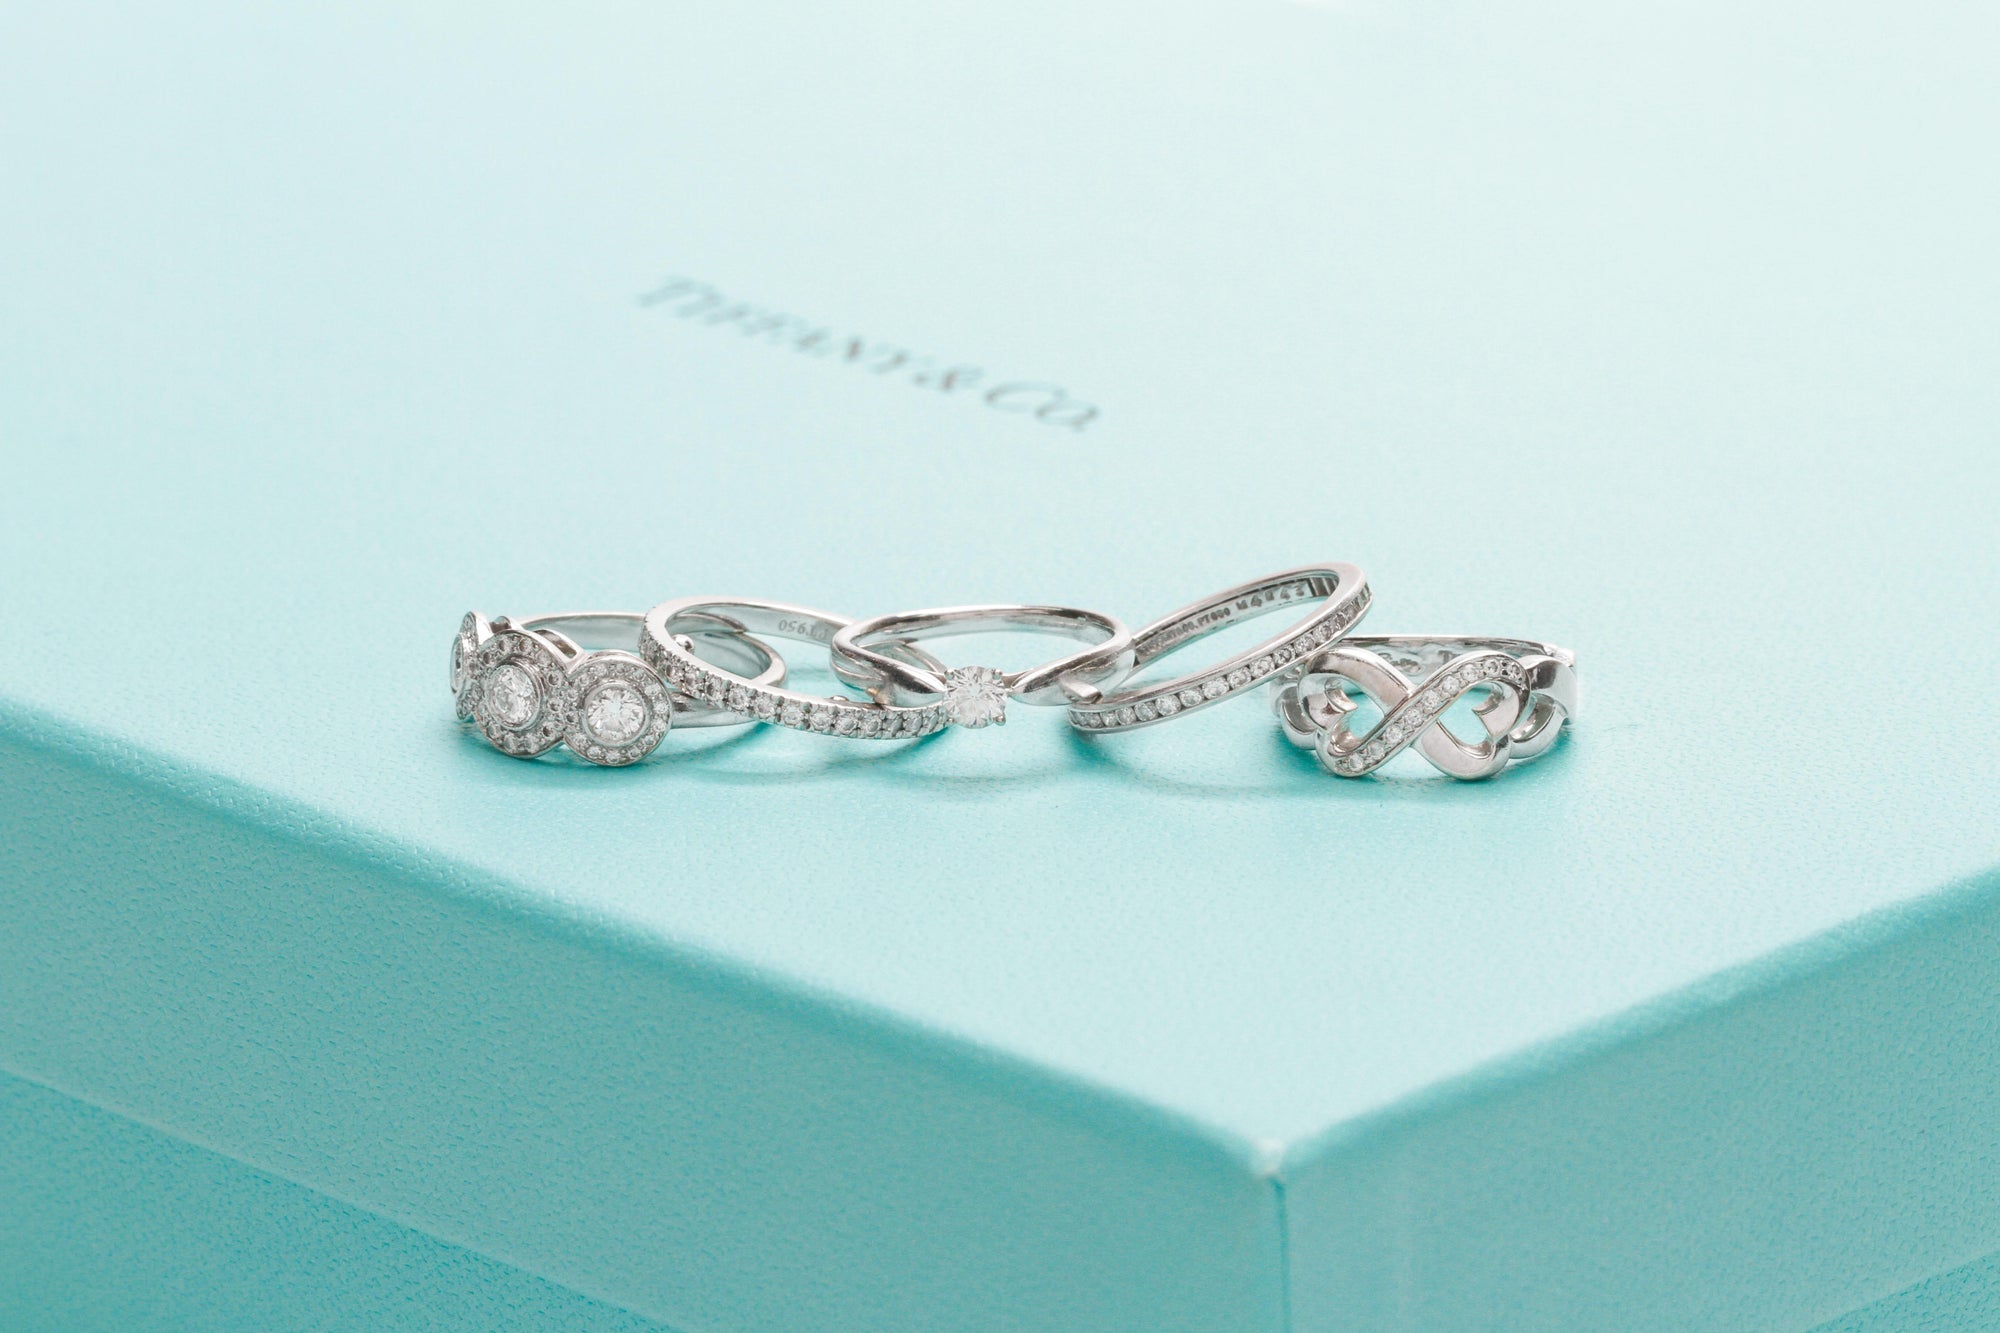 What's So Special About the Tiffany Diamond?